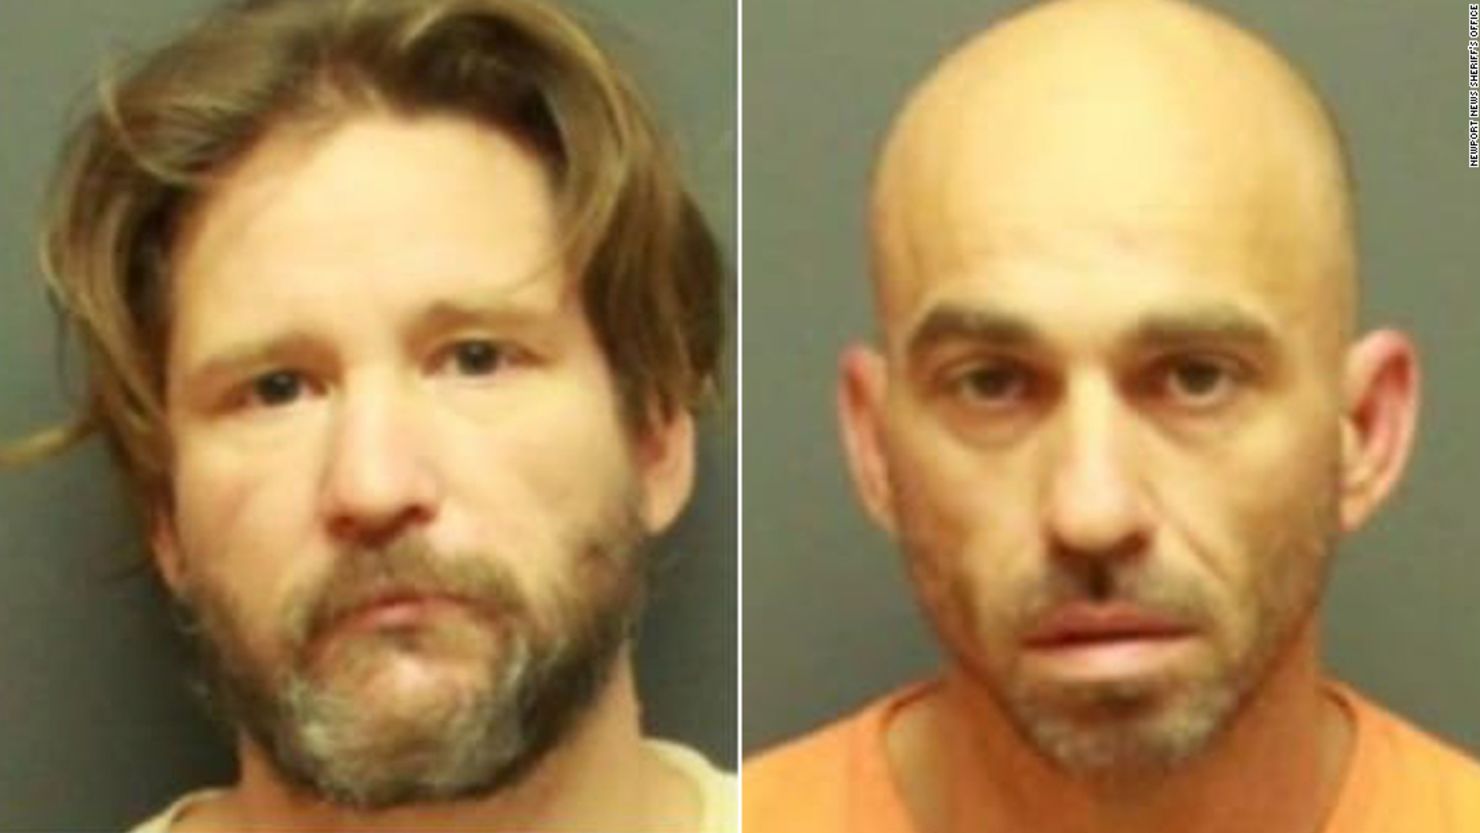 John M. Garza and Arley V. Nemo in photos released by the Newport News Sheriff's Office.